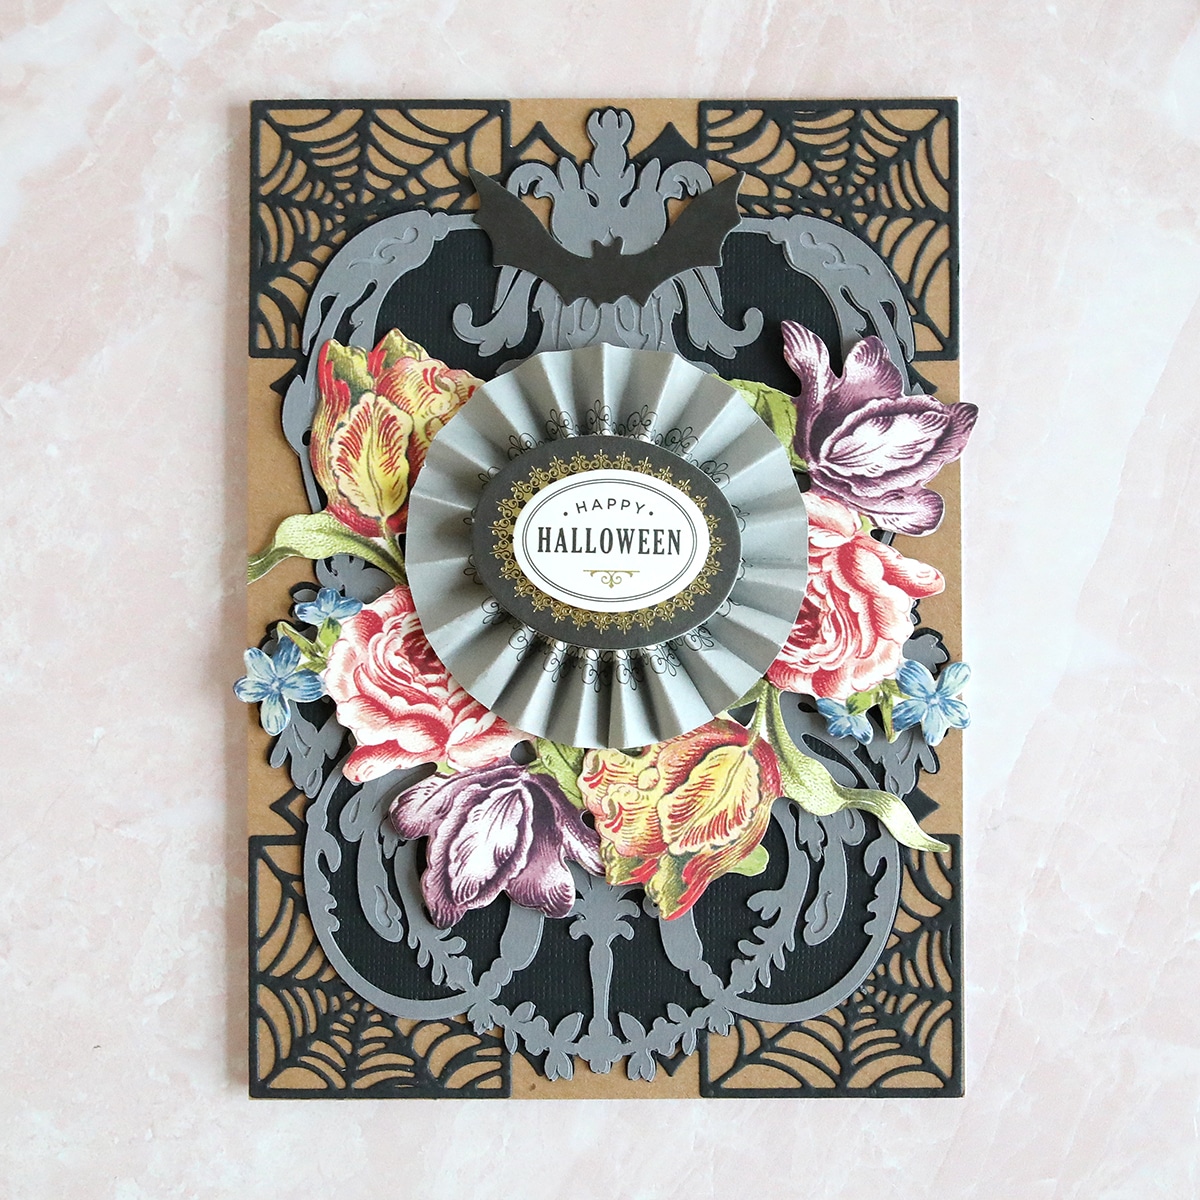 A halloween card with flowers and a ribbon.